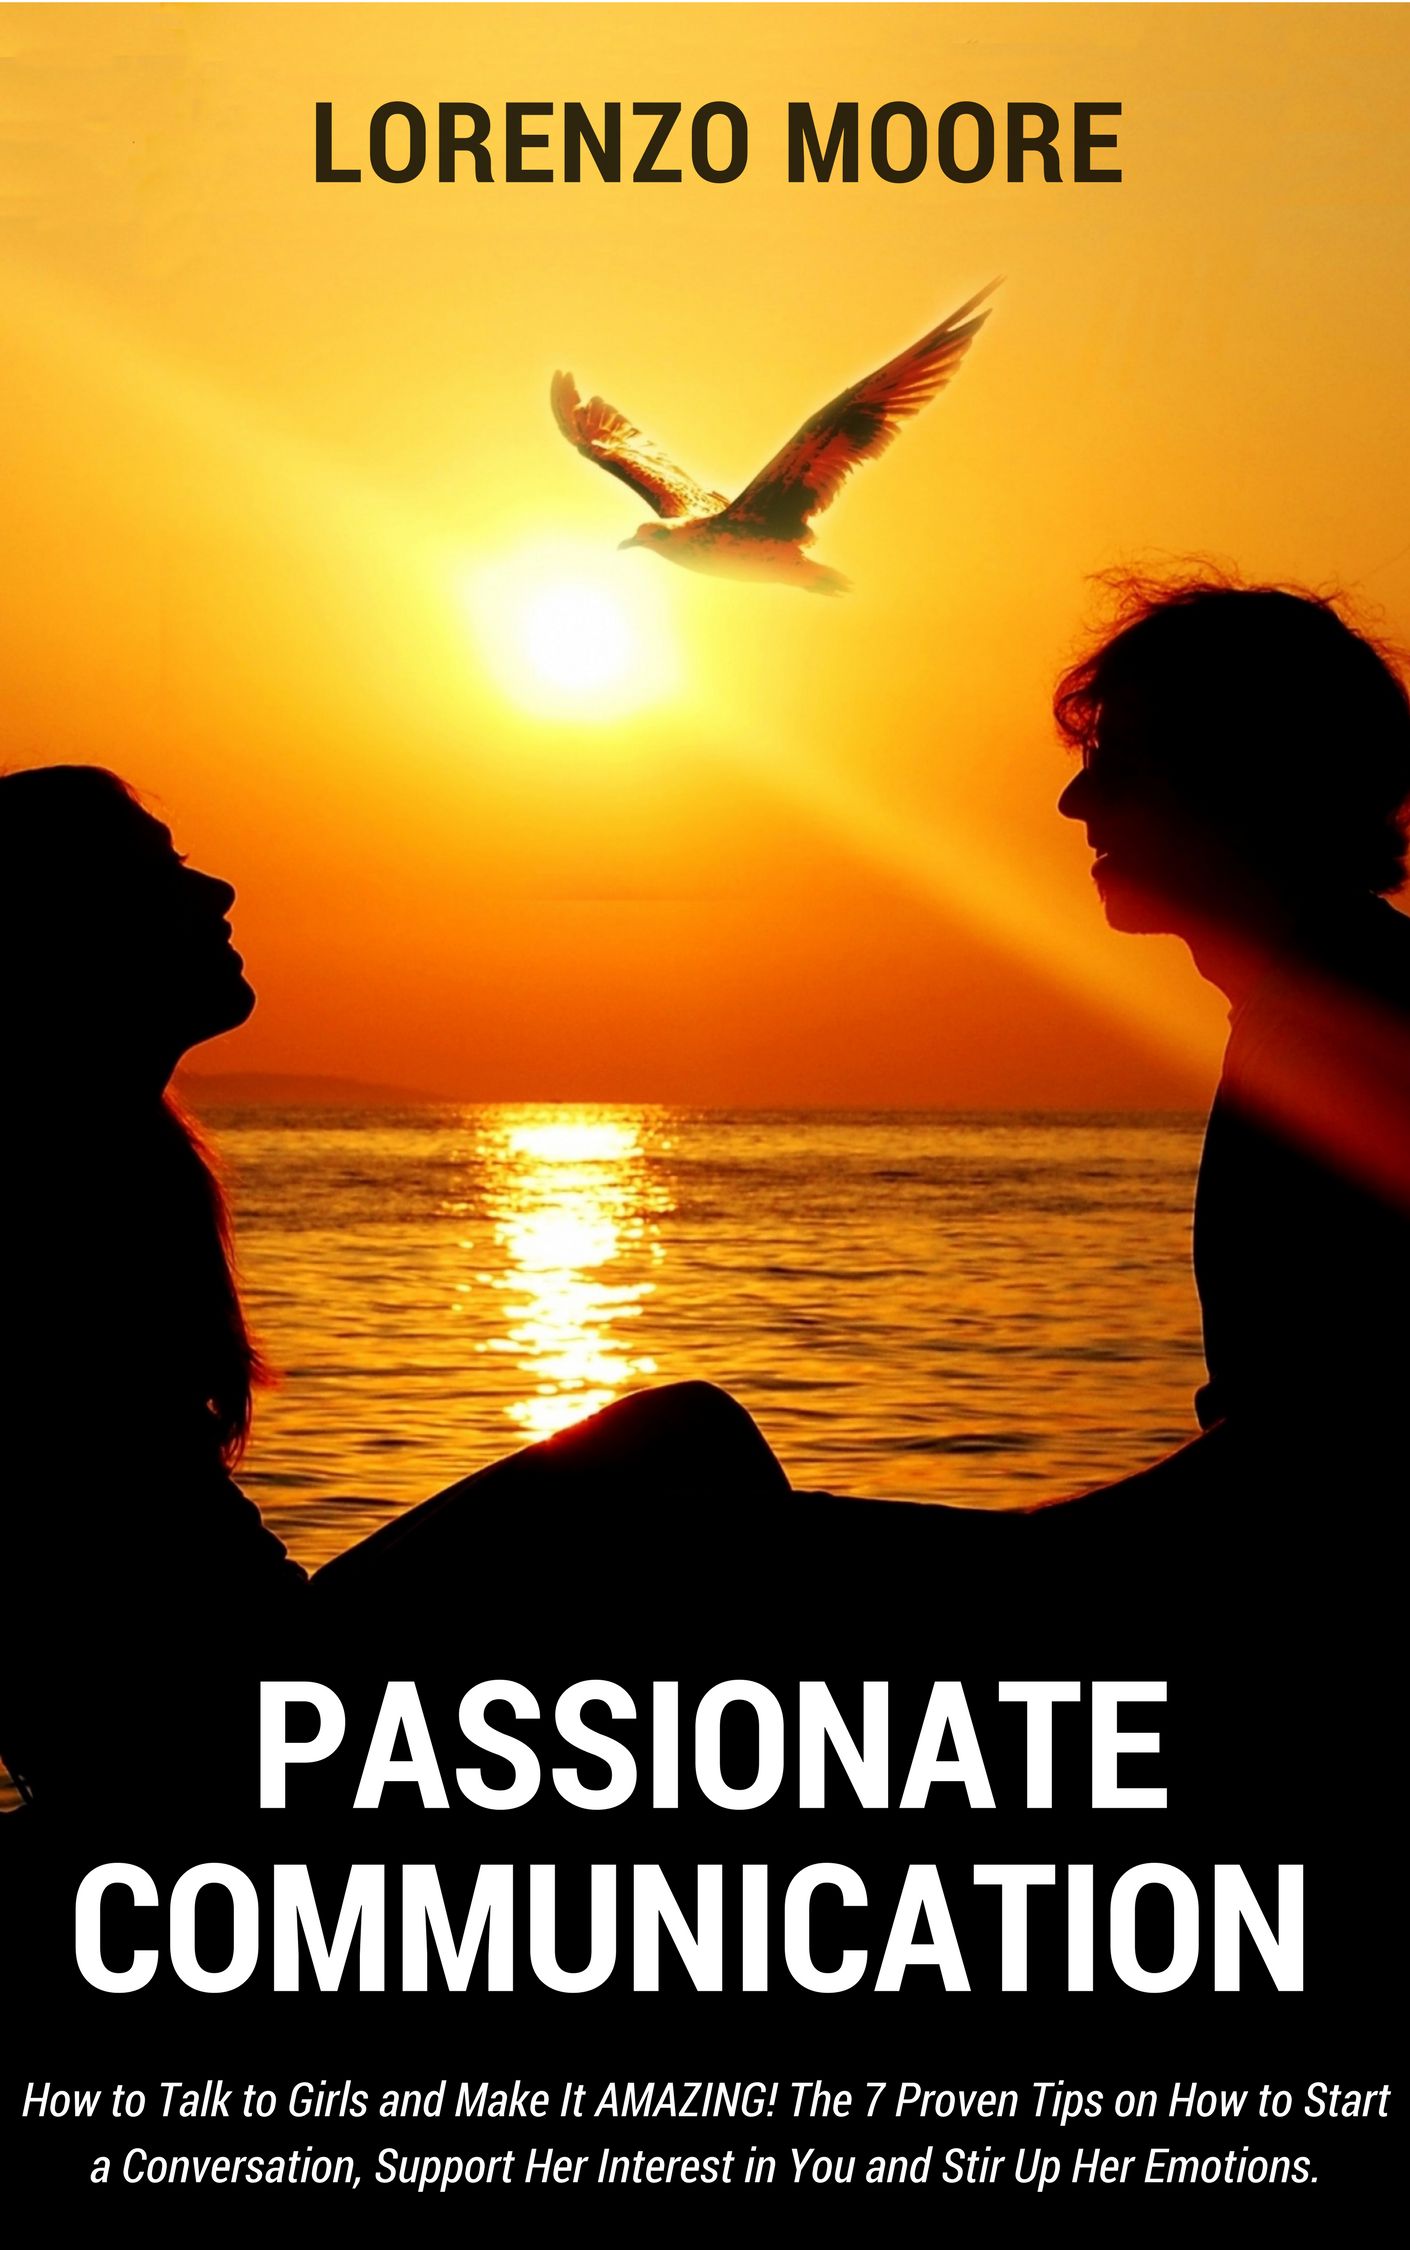 FREE: Passionate Communication: How To Talk to Girls and Make It AMAZING. The 7 Proven Tips on How to Start a Conversation, Support Her Interest in You and Stir Up Her Emotions by Lorenzo Moore